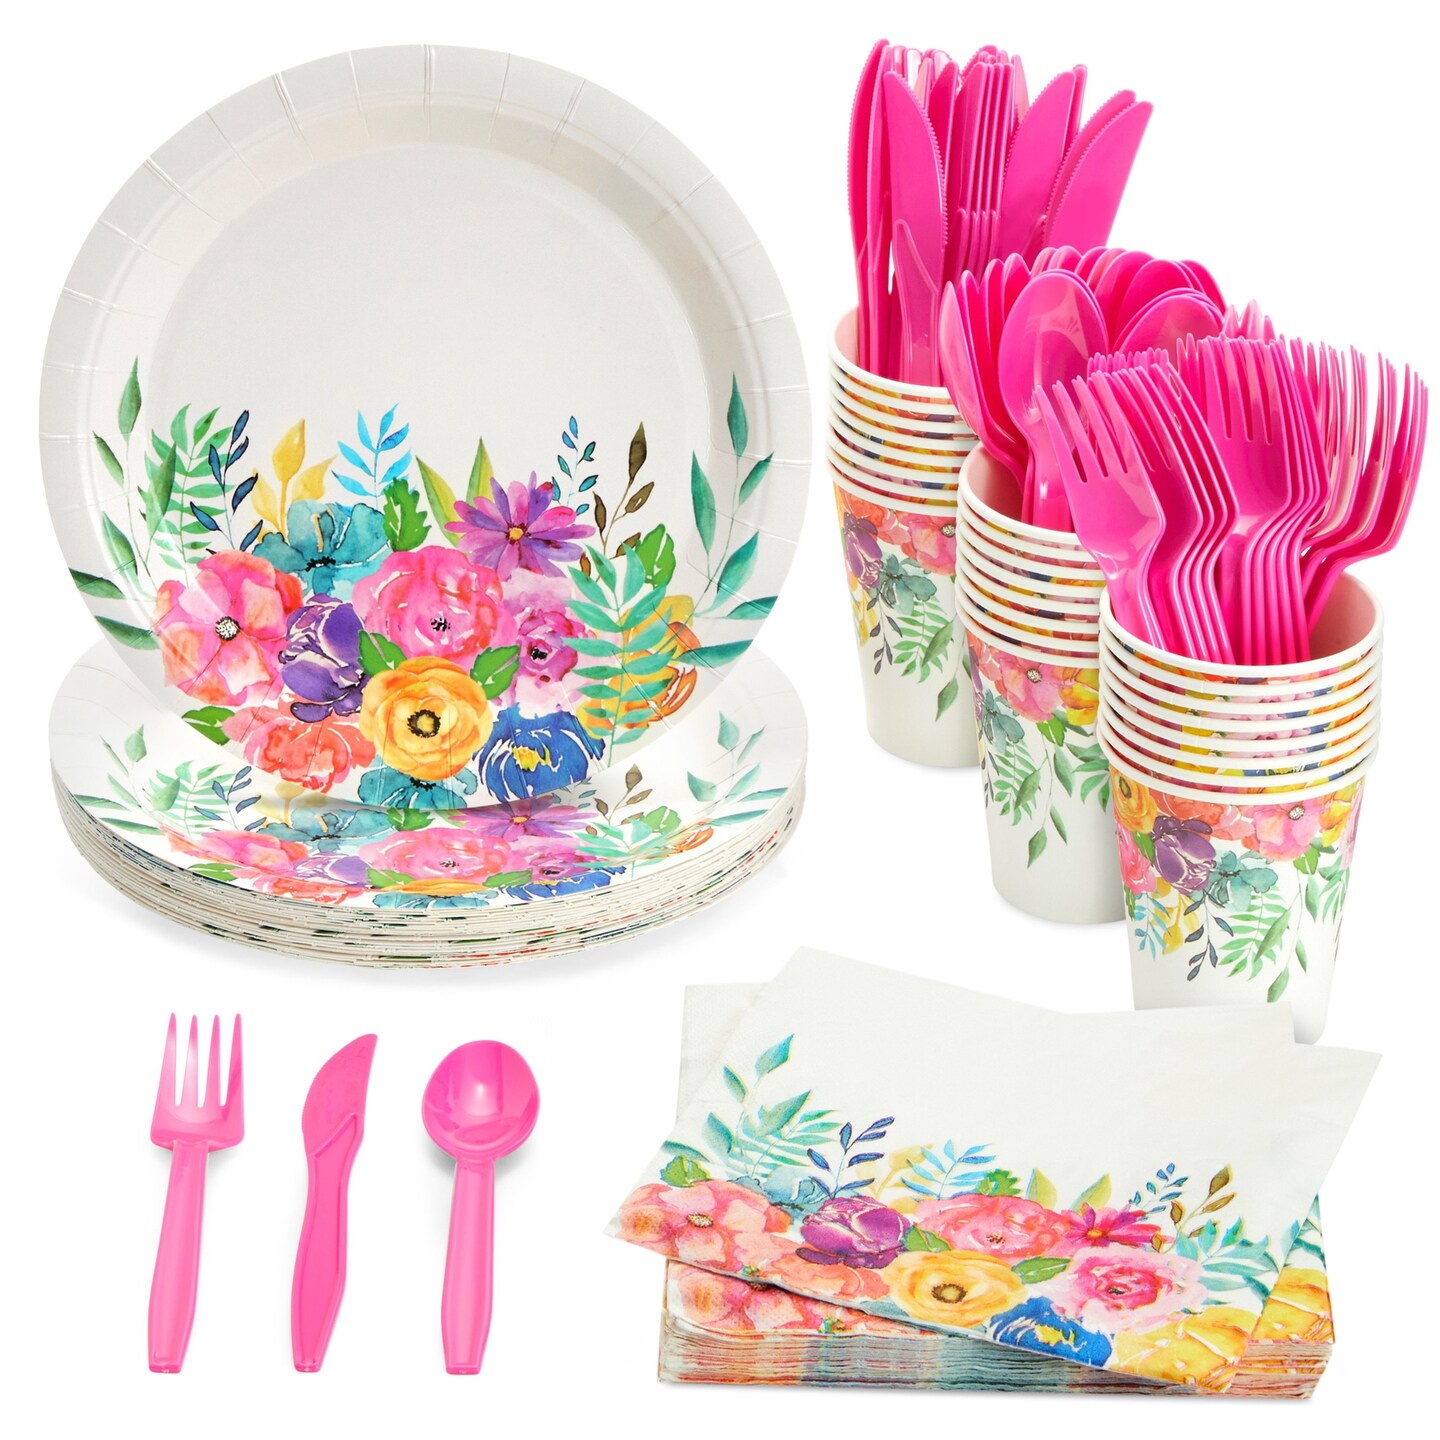 144-Piece Tea Party Supplies - Floral Paper Plates, Napkins, Cups and Cutlery for Bridal Shower, Wedding, Girls Baby Shower (Serves 24)